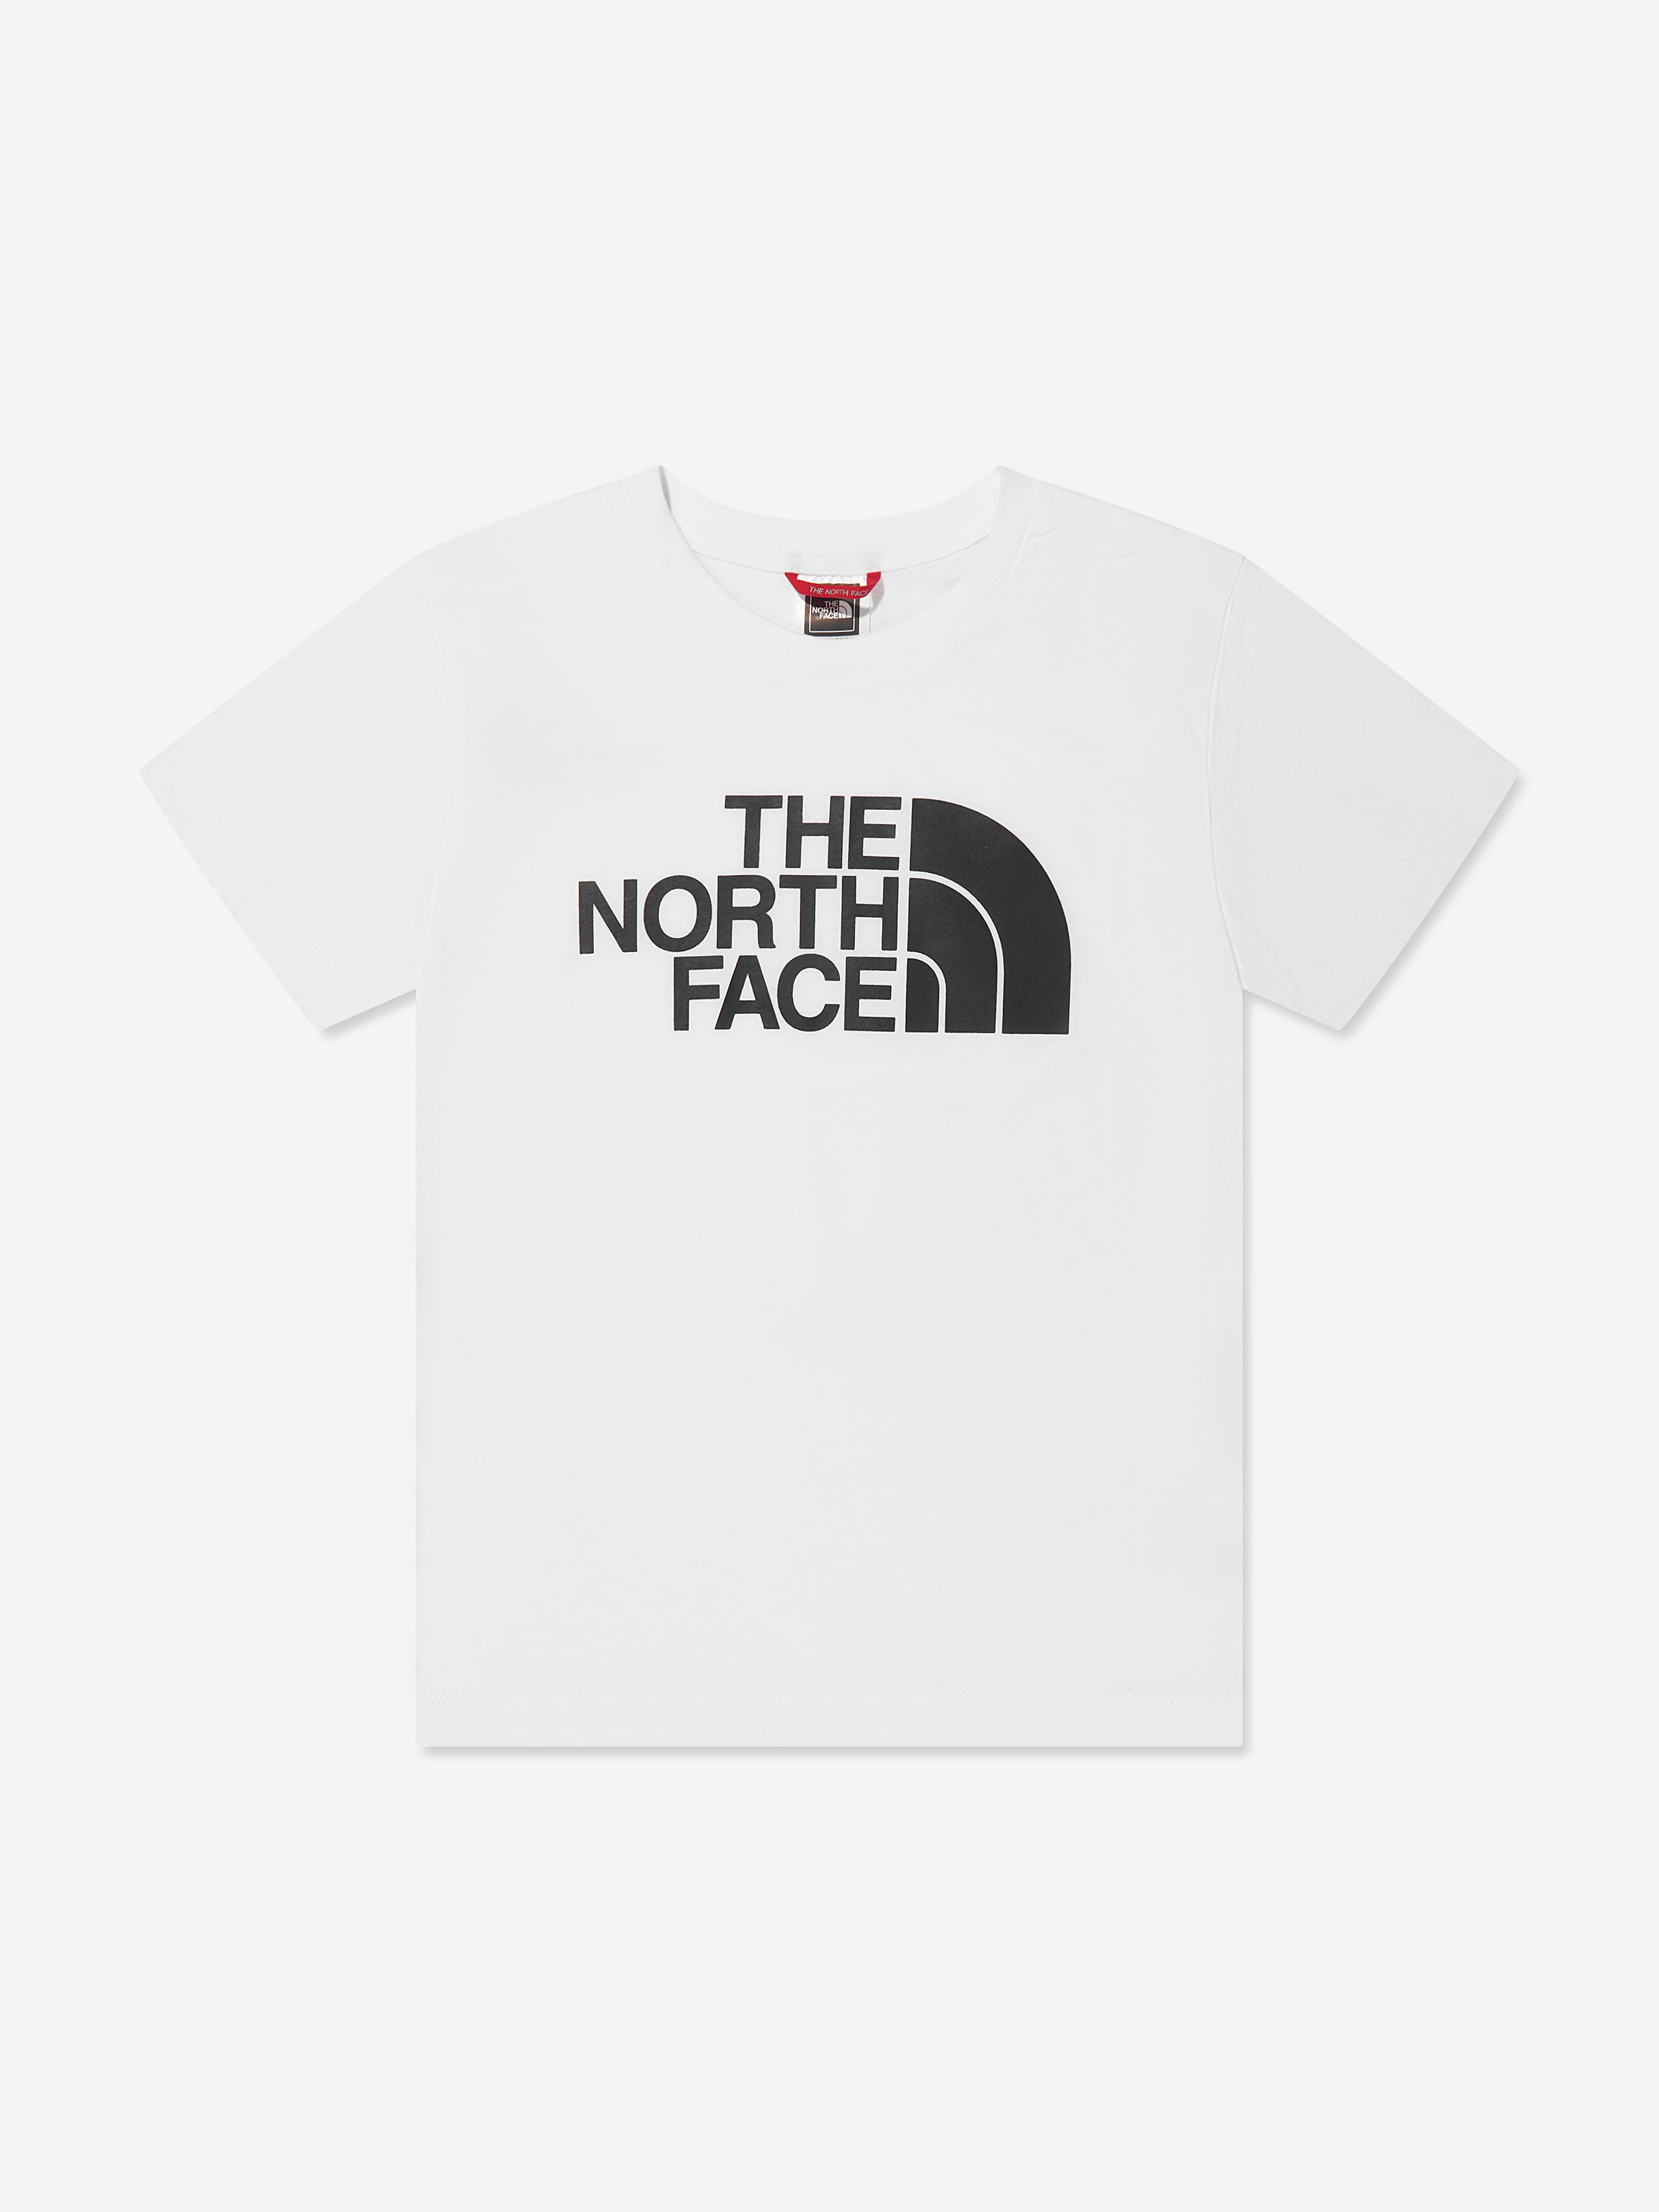 The North Face Boys Easy T-Shirt in White | Childsplay Clothing